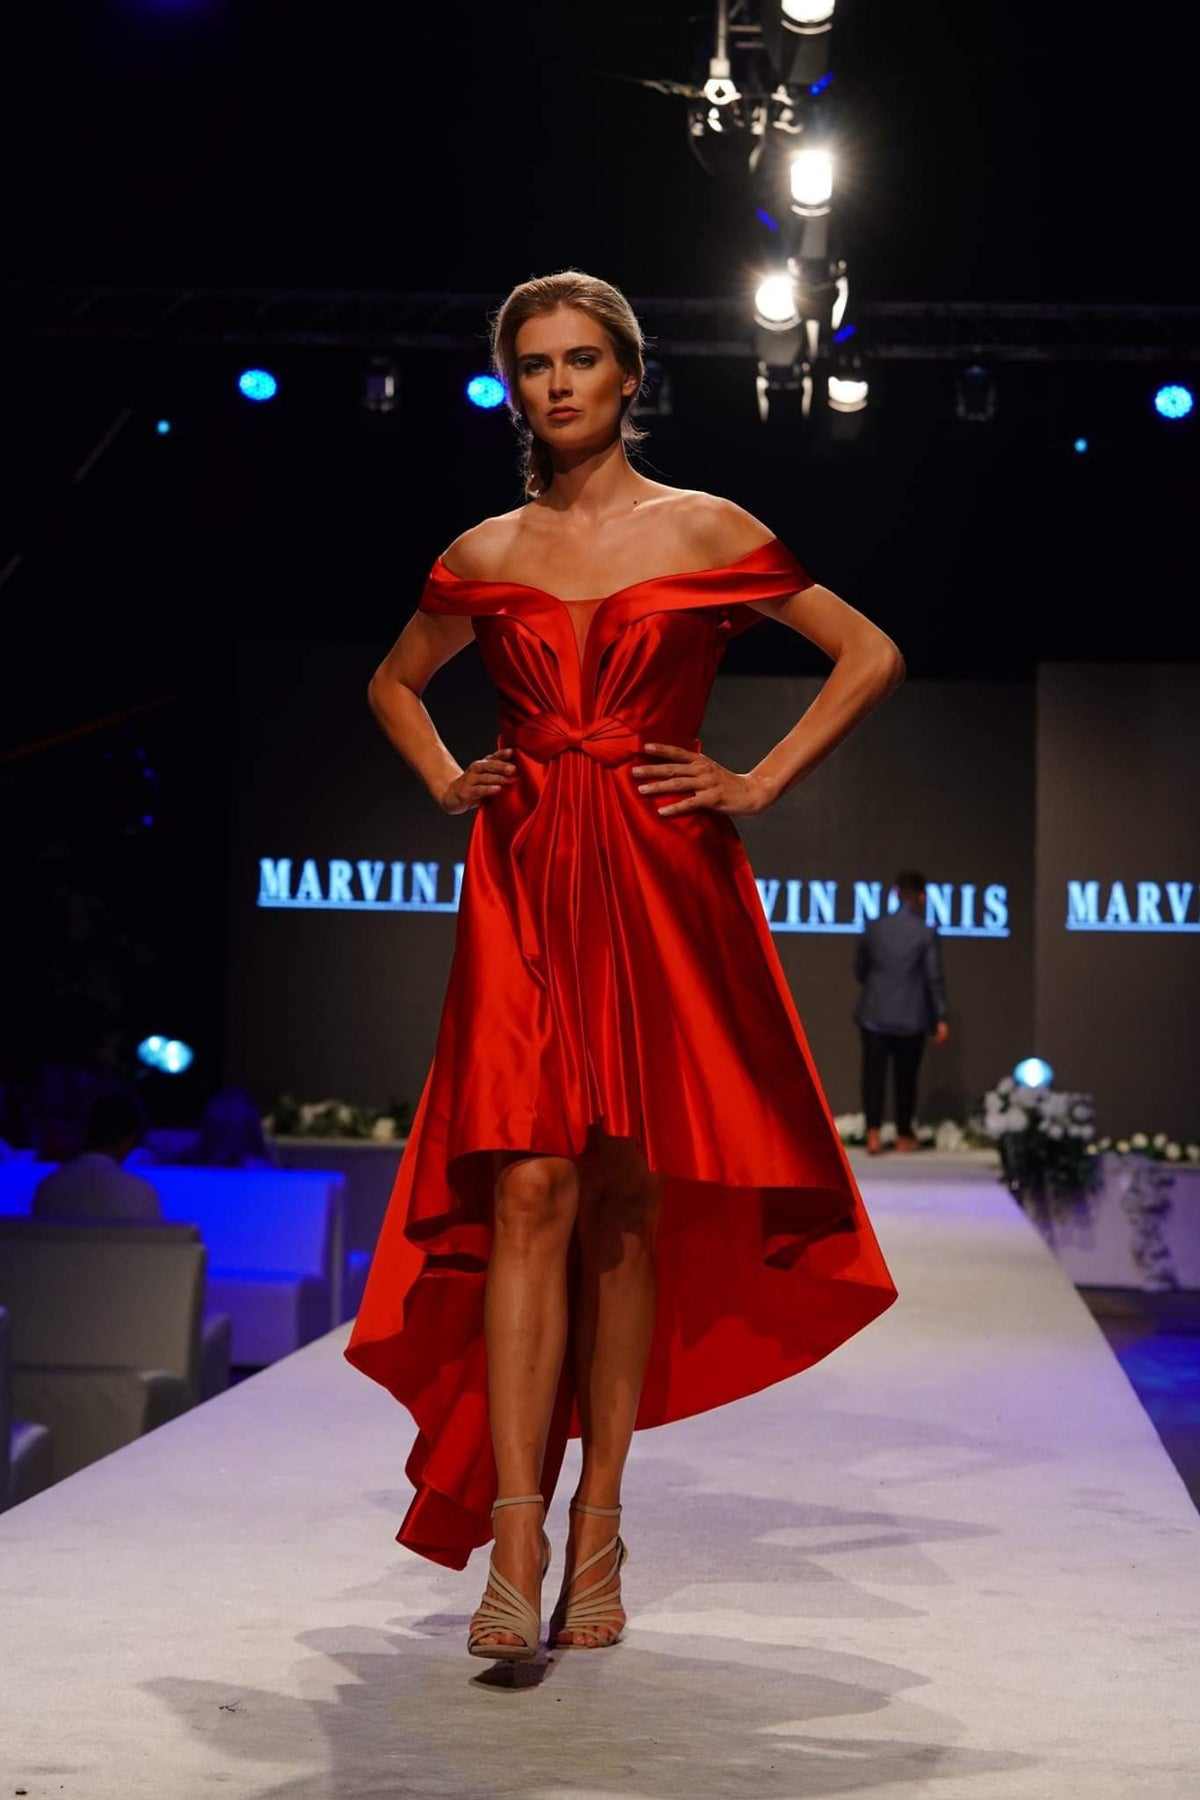 Marvin Nonis Satin Off The Shoulder Cherry Red Dress